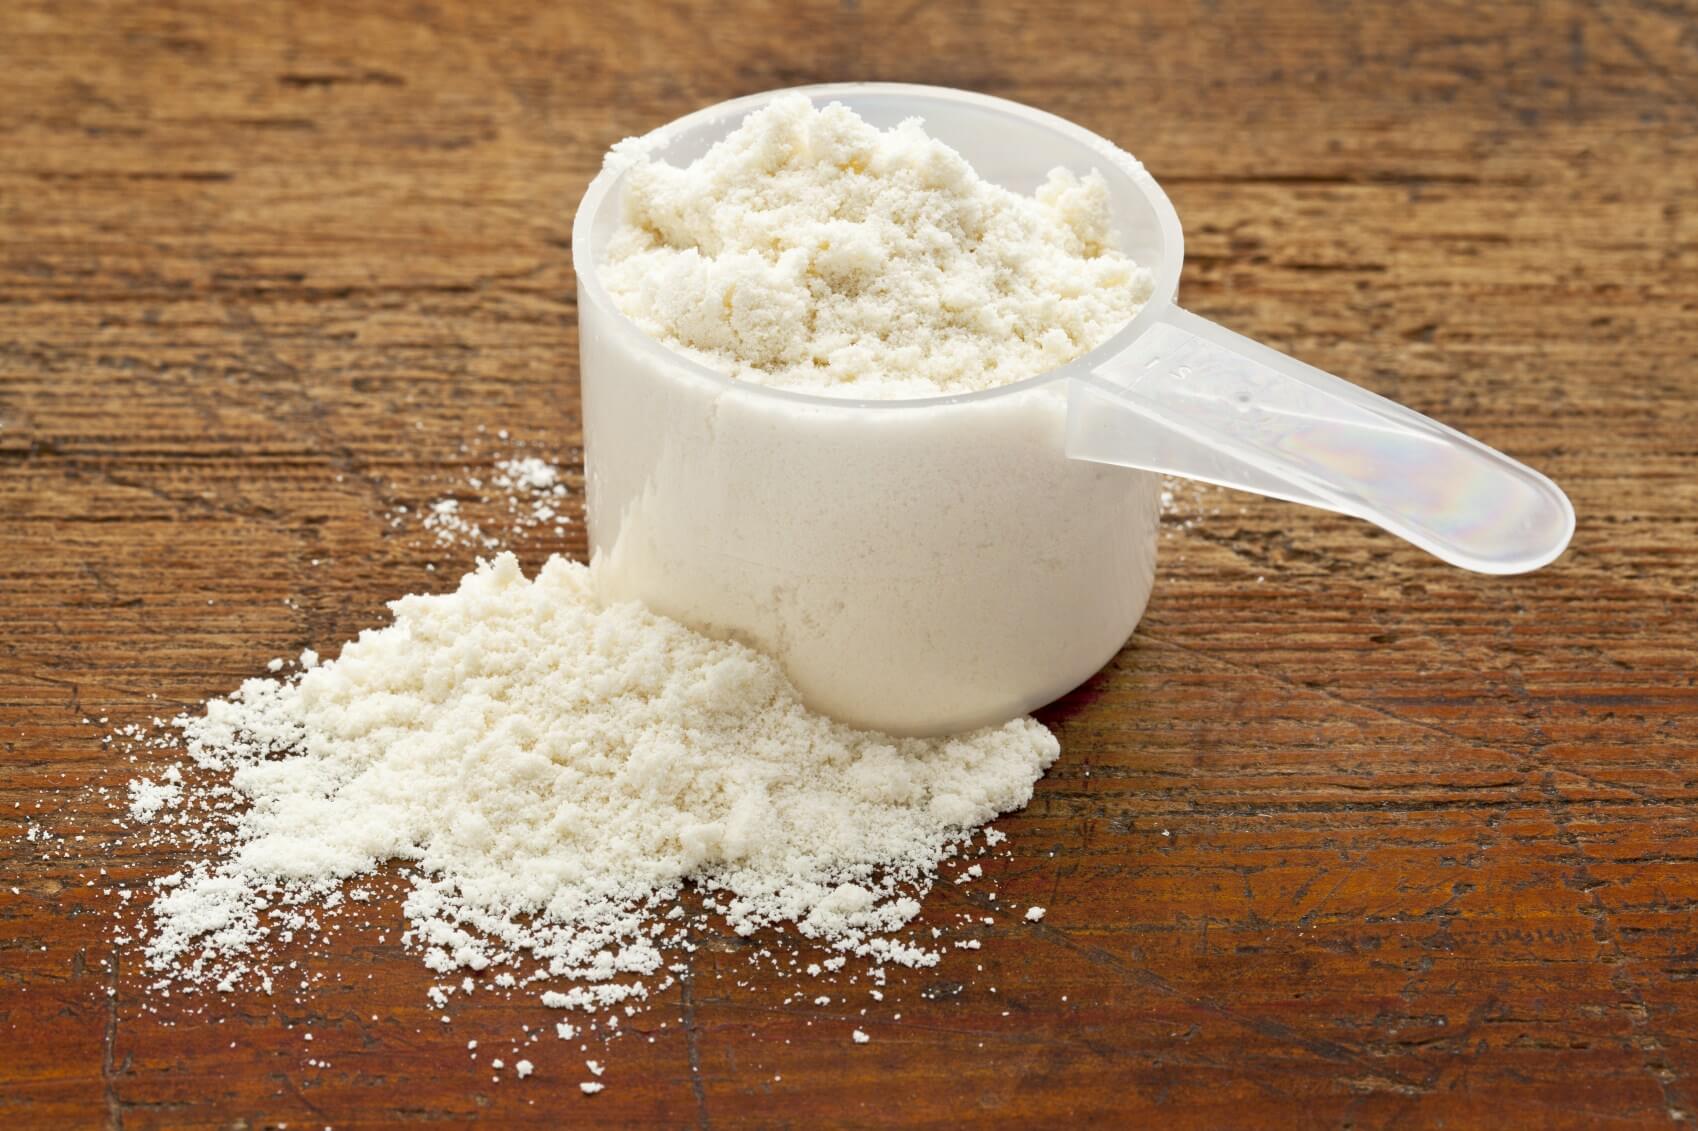 19-trader-joes-soy-protein-powder-nutrition-facts